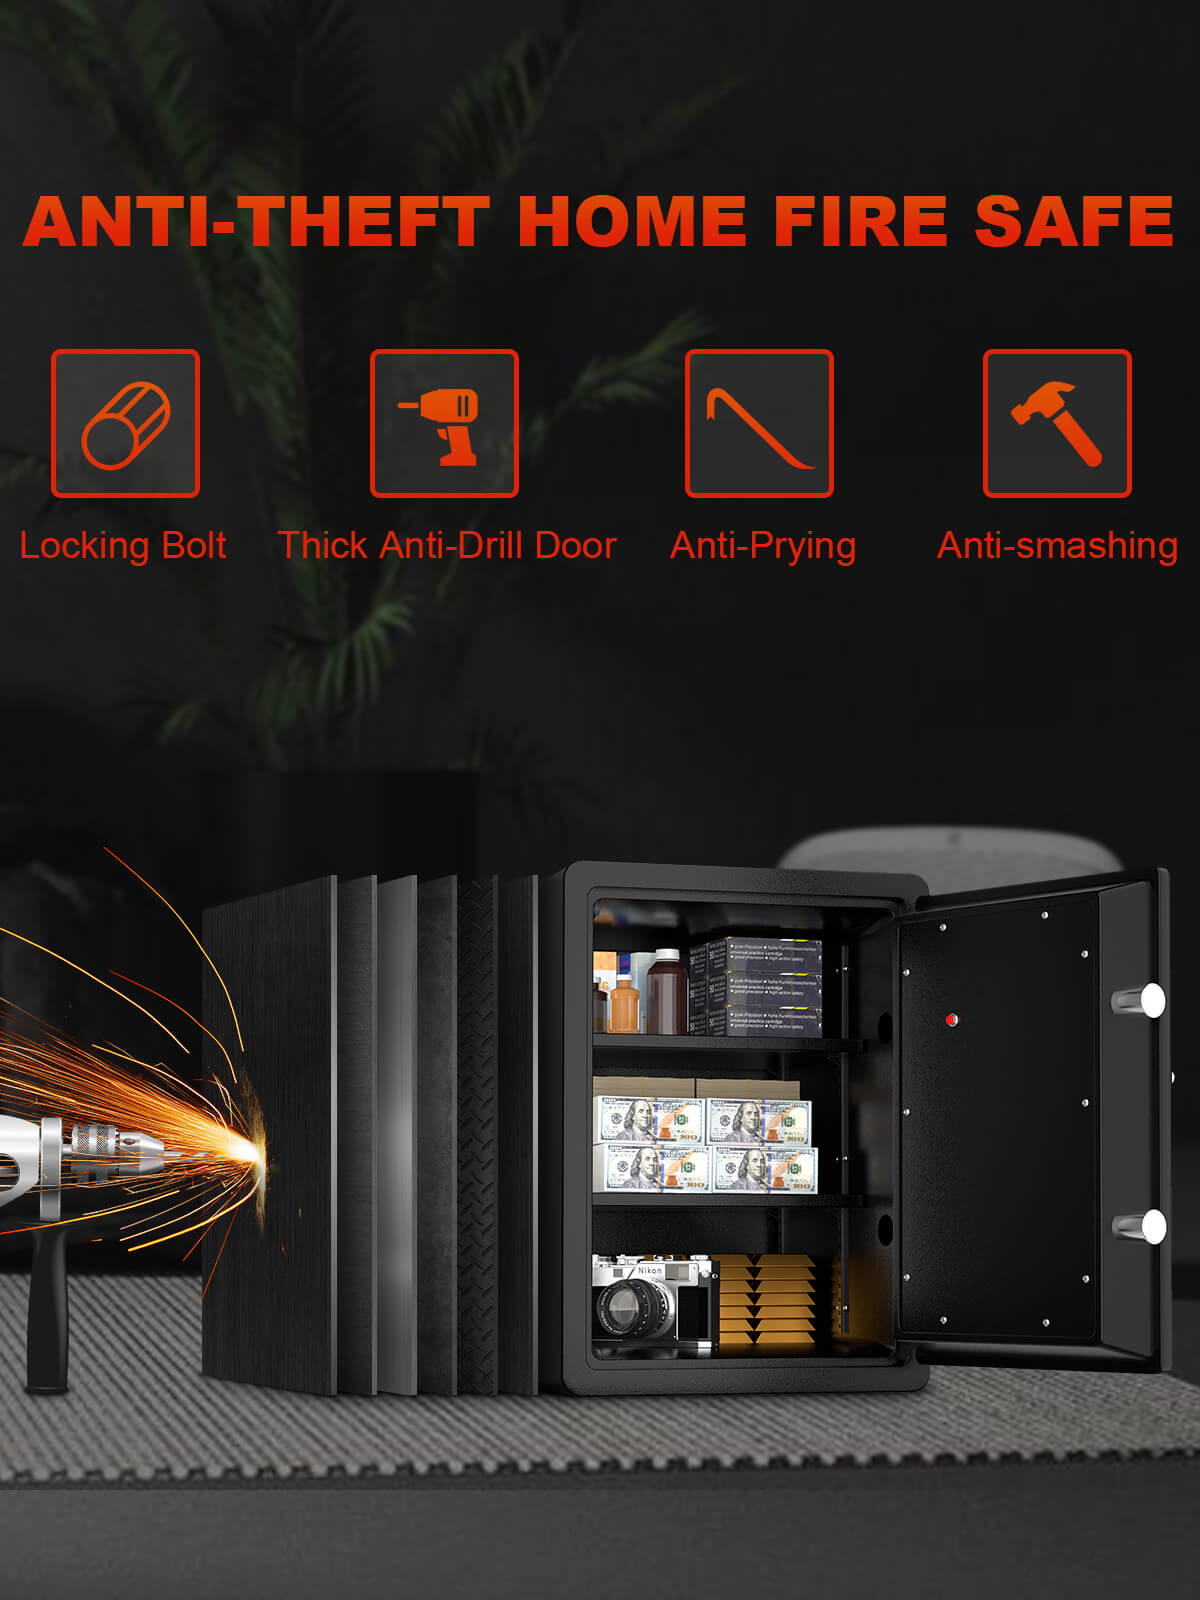 TIGERKING 1 Hour Fireproof Safe Box Safe 1.74 Cu.ft with Digital Touchscreen Keypad Lock Quick Access Biometric Home Security Safes 60DZ